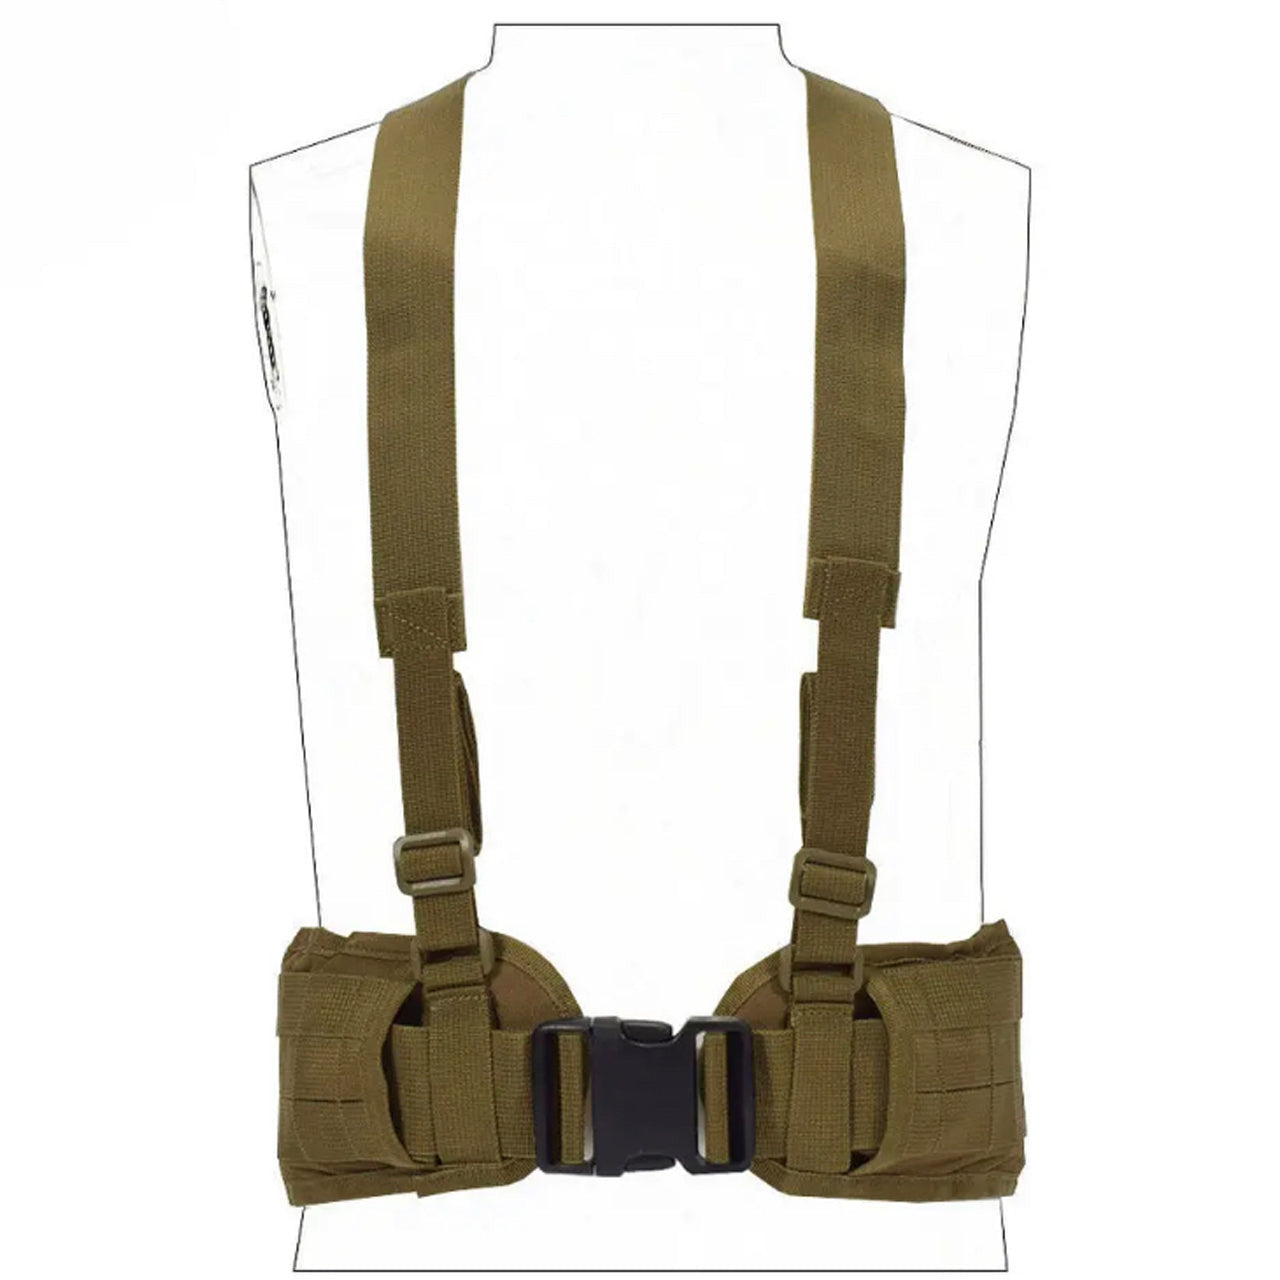 Boasting three rows of MOLLE-designed webbing straps for easy pouch attachment, the Cross Harness Platform is a lightweight, low-profile option with adjustable waist straps (34-64 inches) and easy-release, high-quality buckles. www.defenceqstore.com.au colour coyote